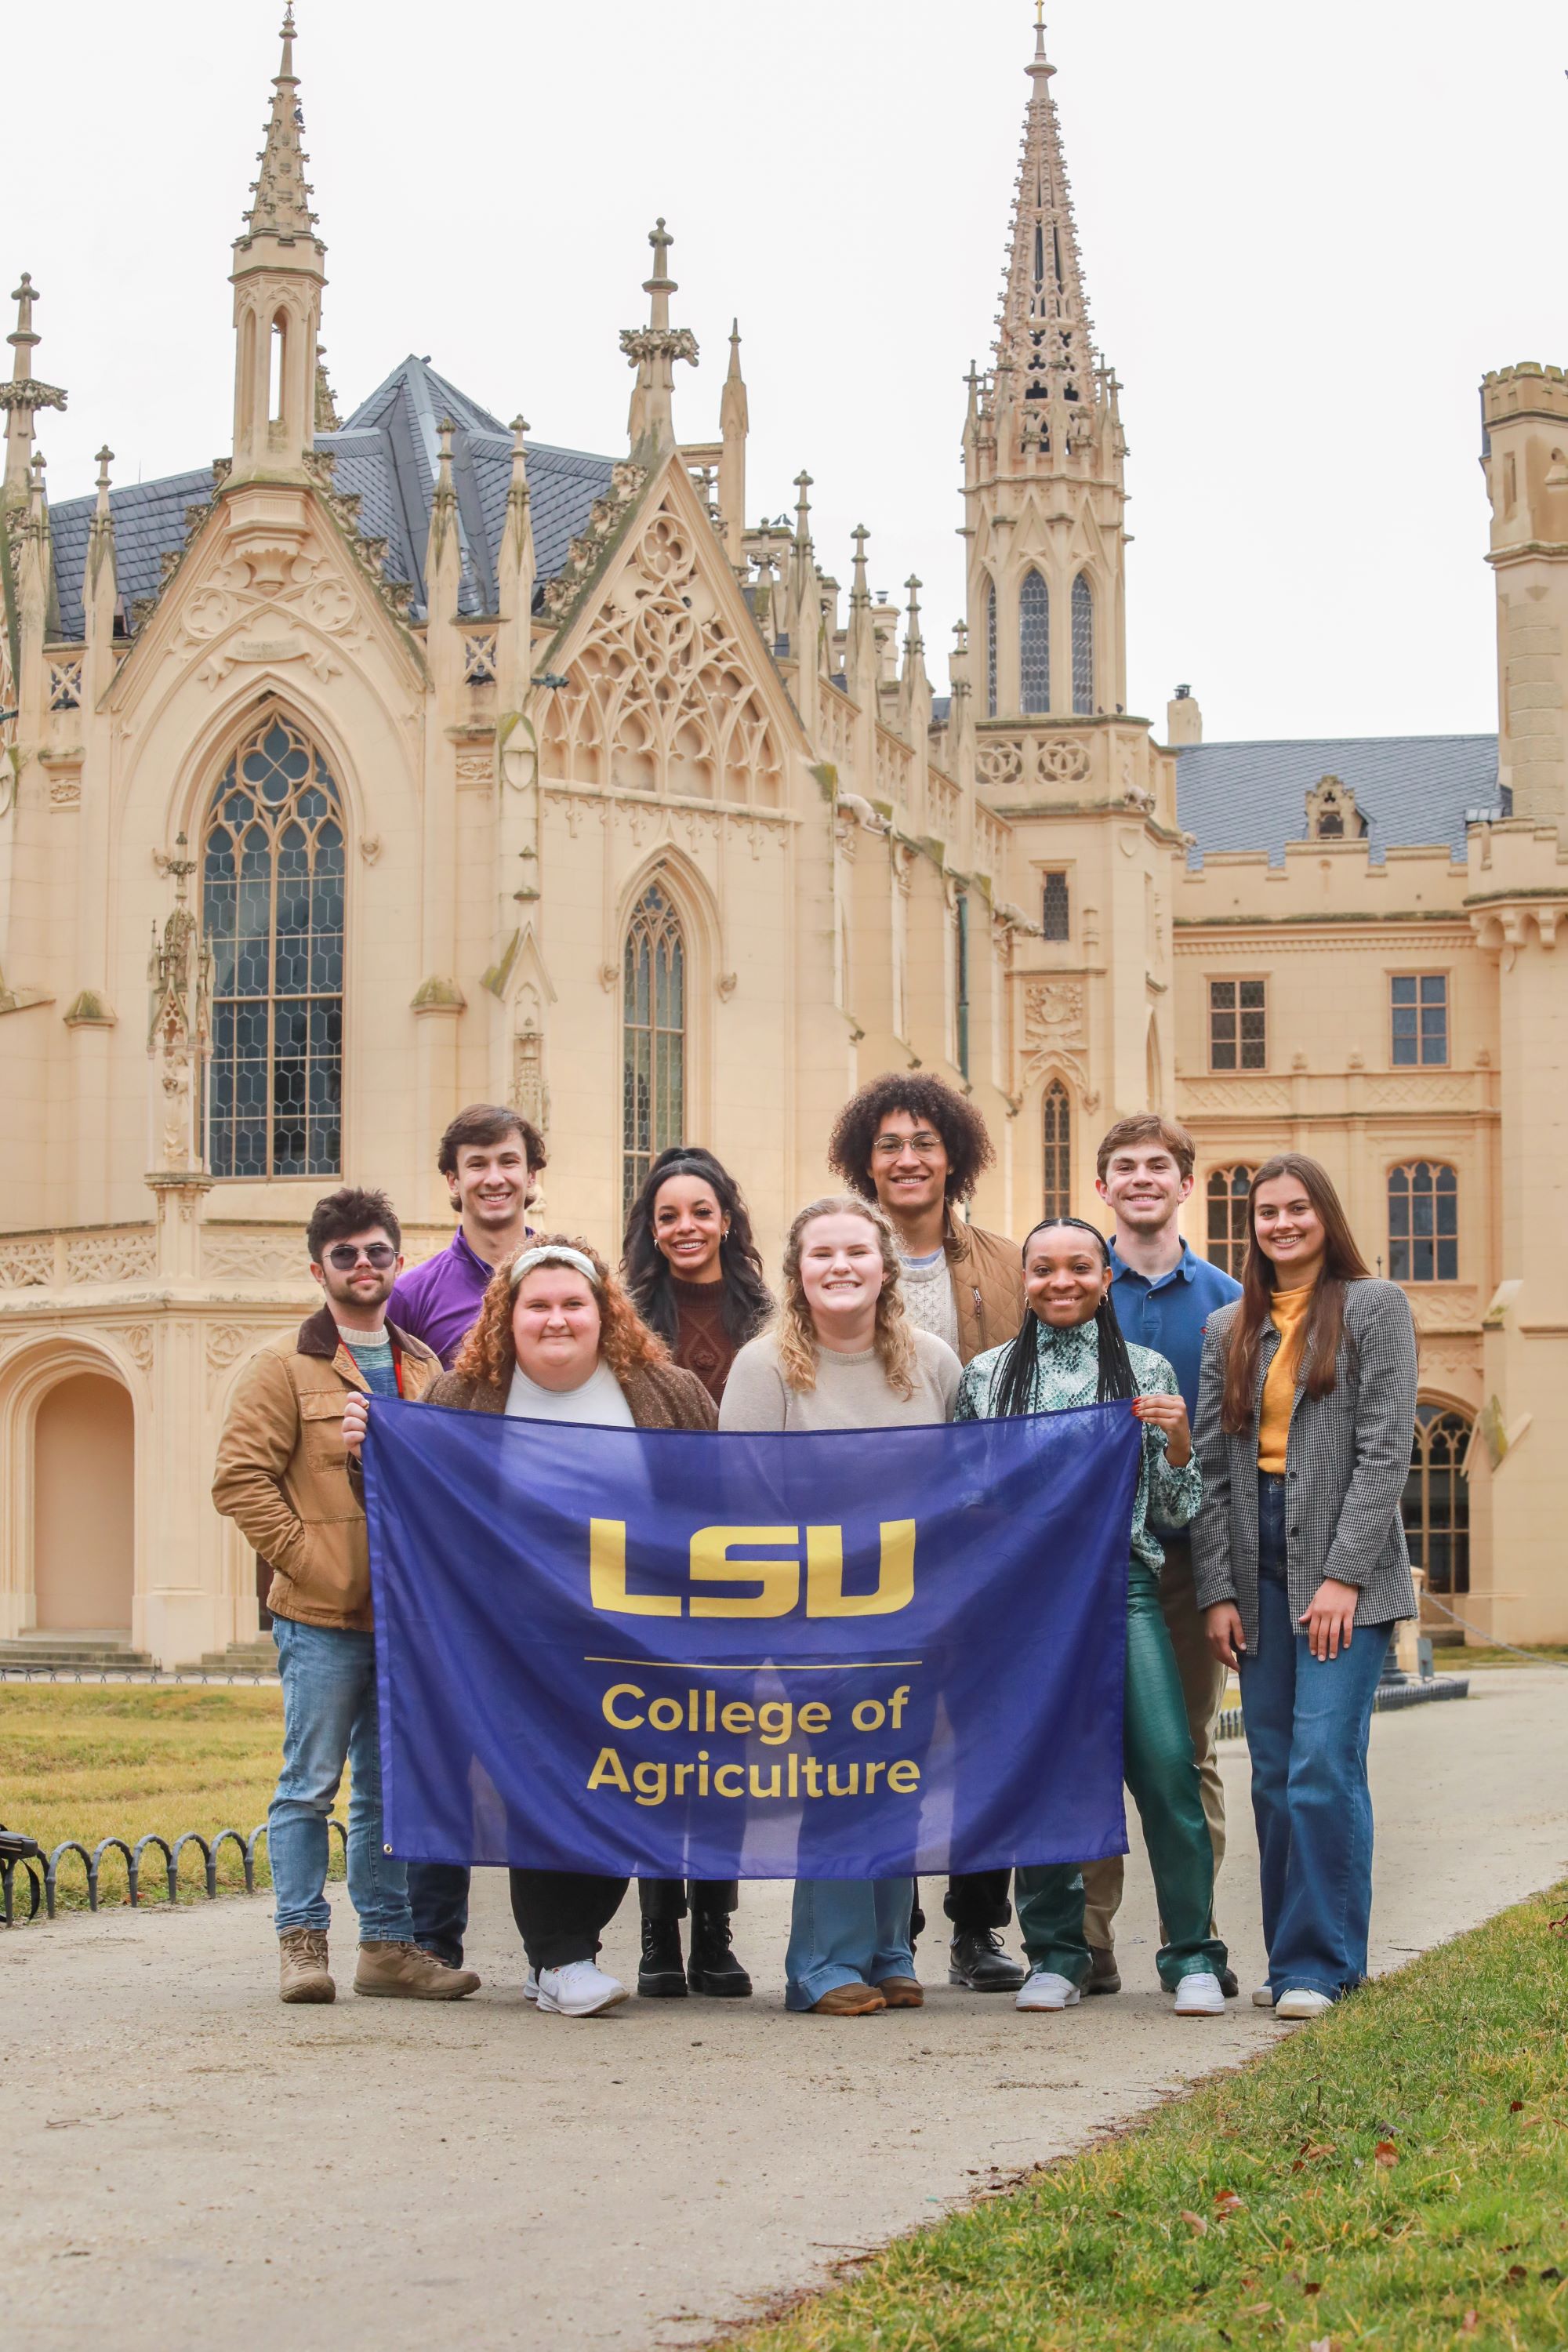 Students hold LSU flag in front of castle